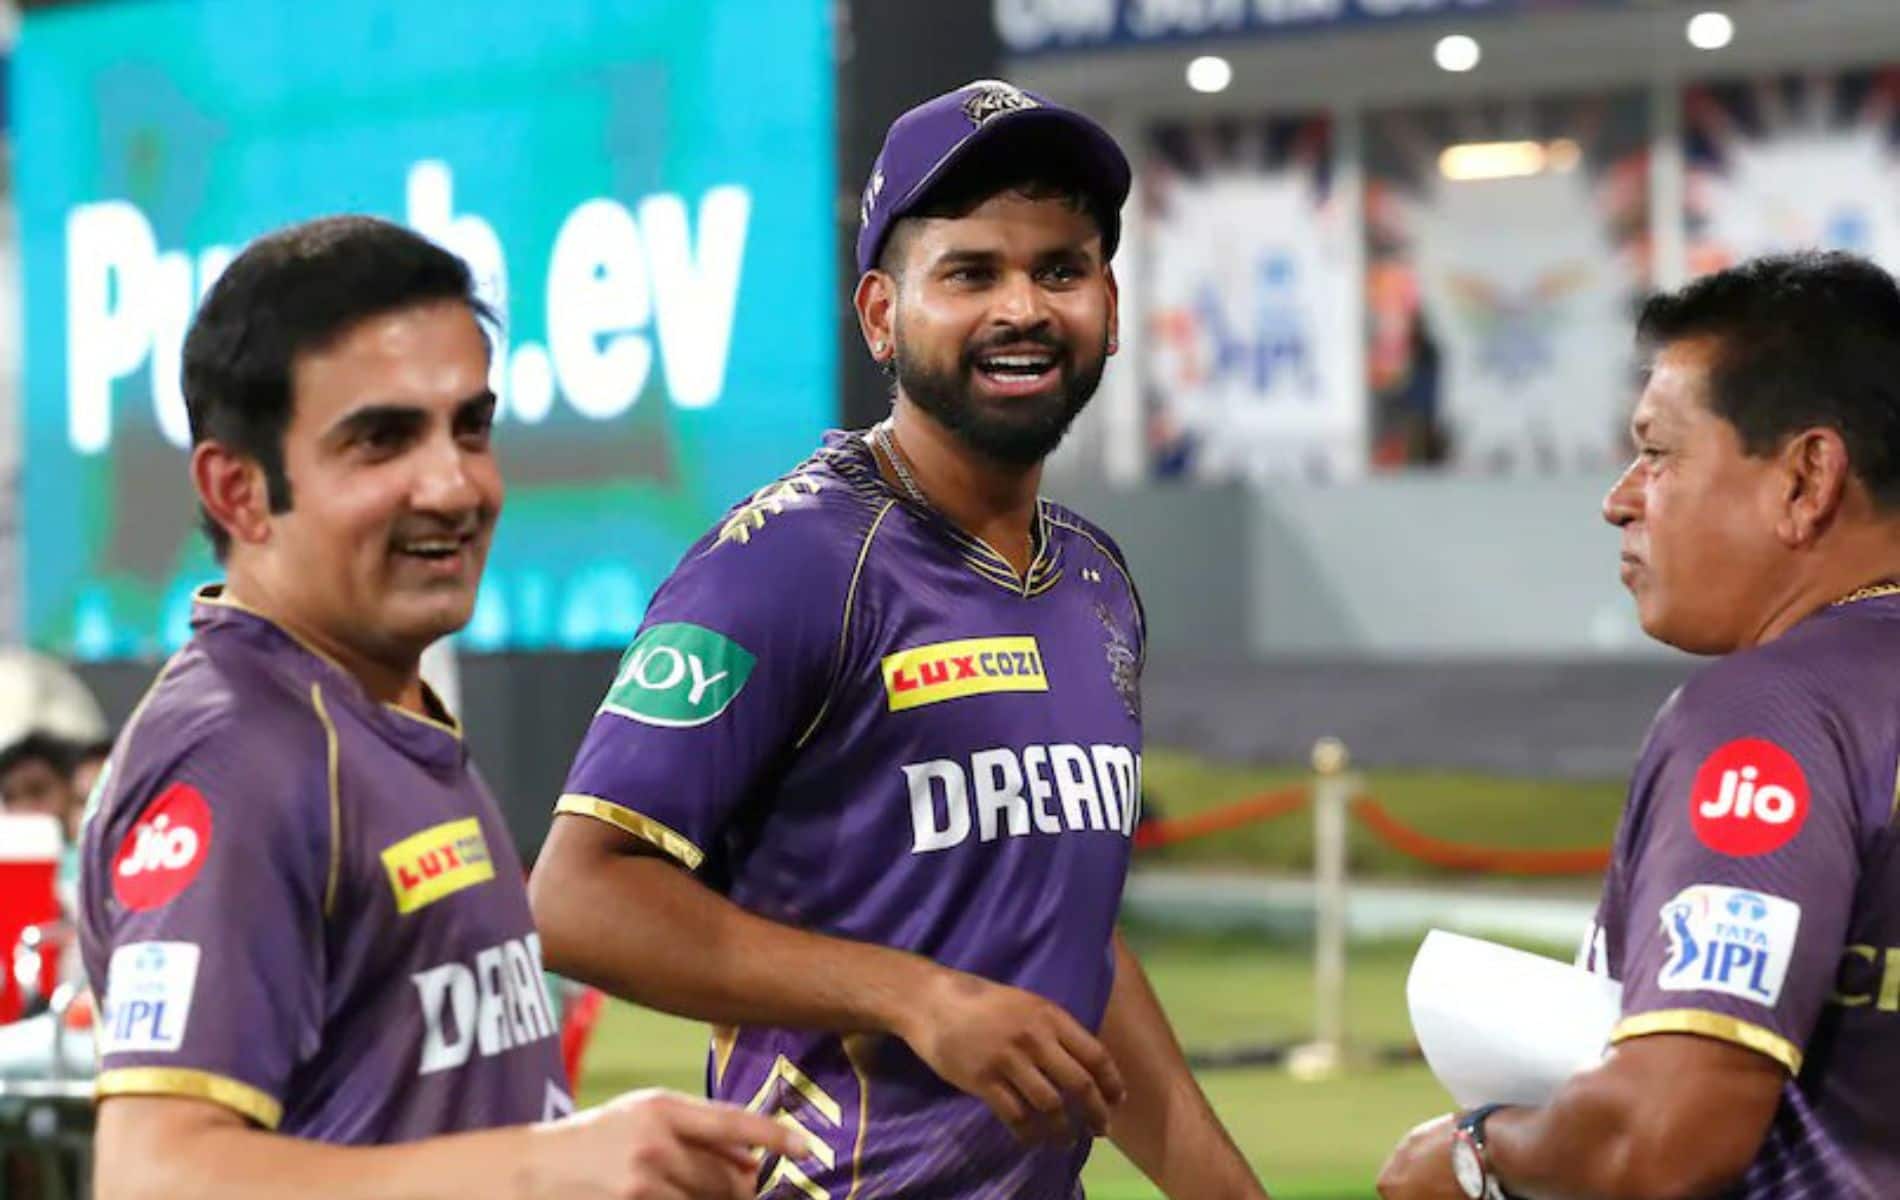 Kolkata Knight Riders stands at number 1 position in the table (x.com)